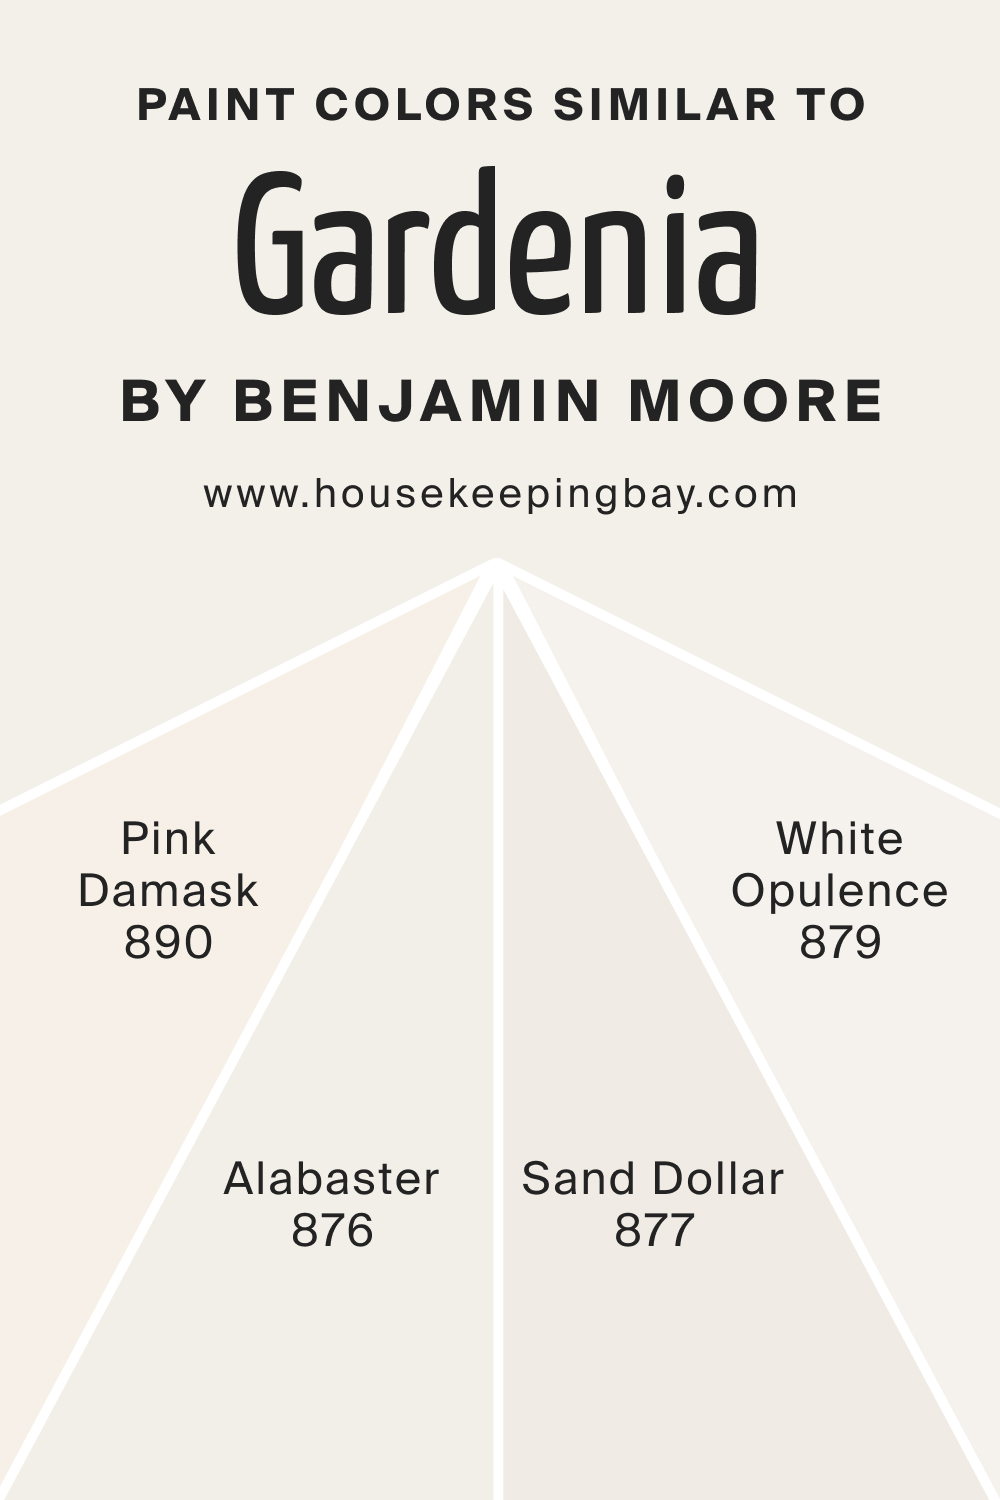 Paint Colors Similar to Gardenia AF 10 by Benjamin Moore